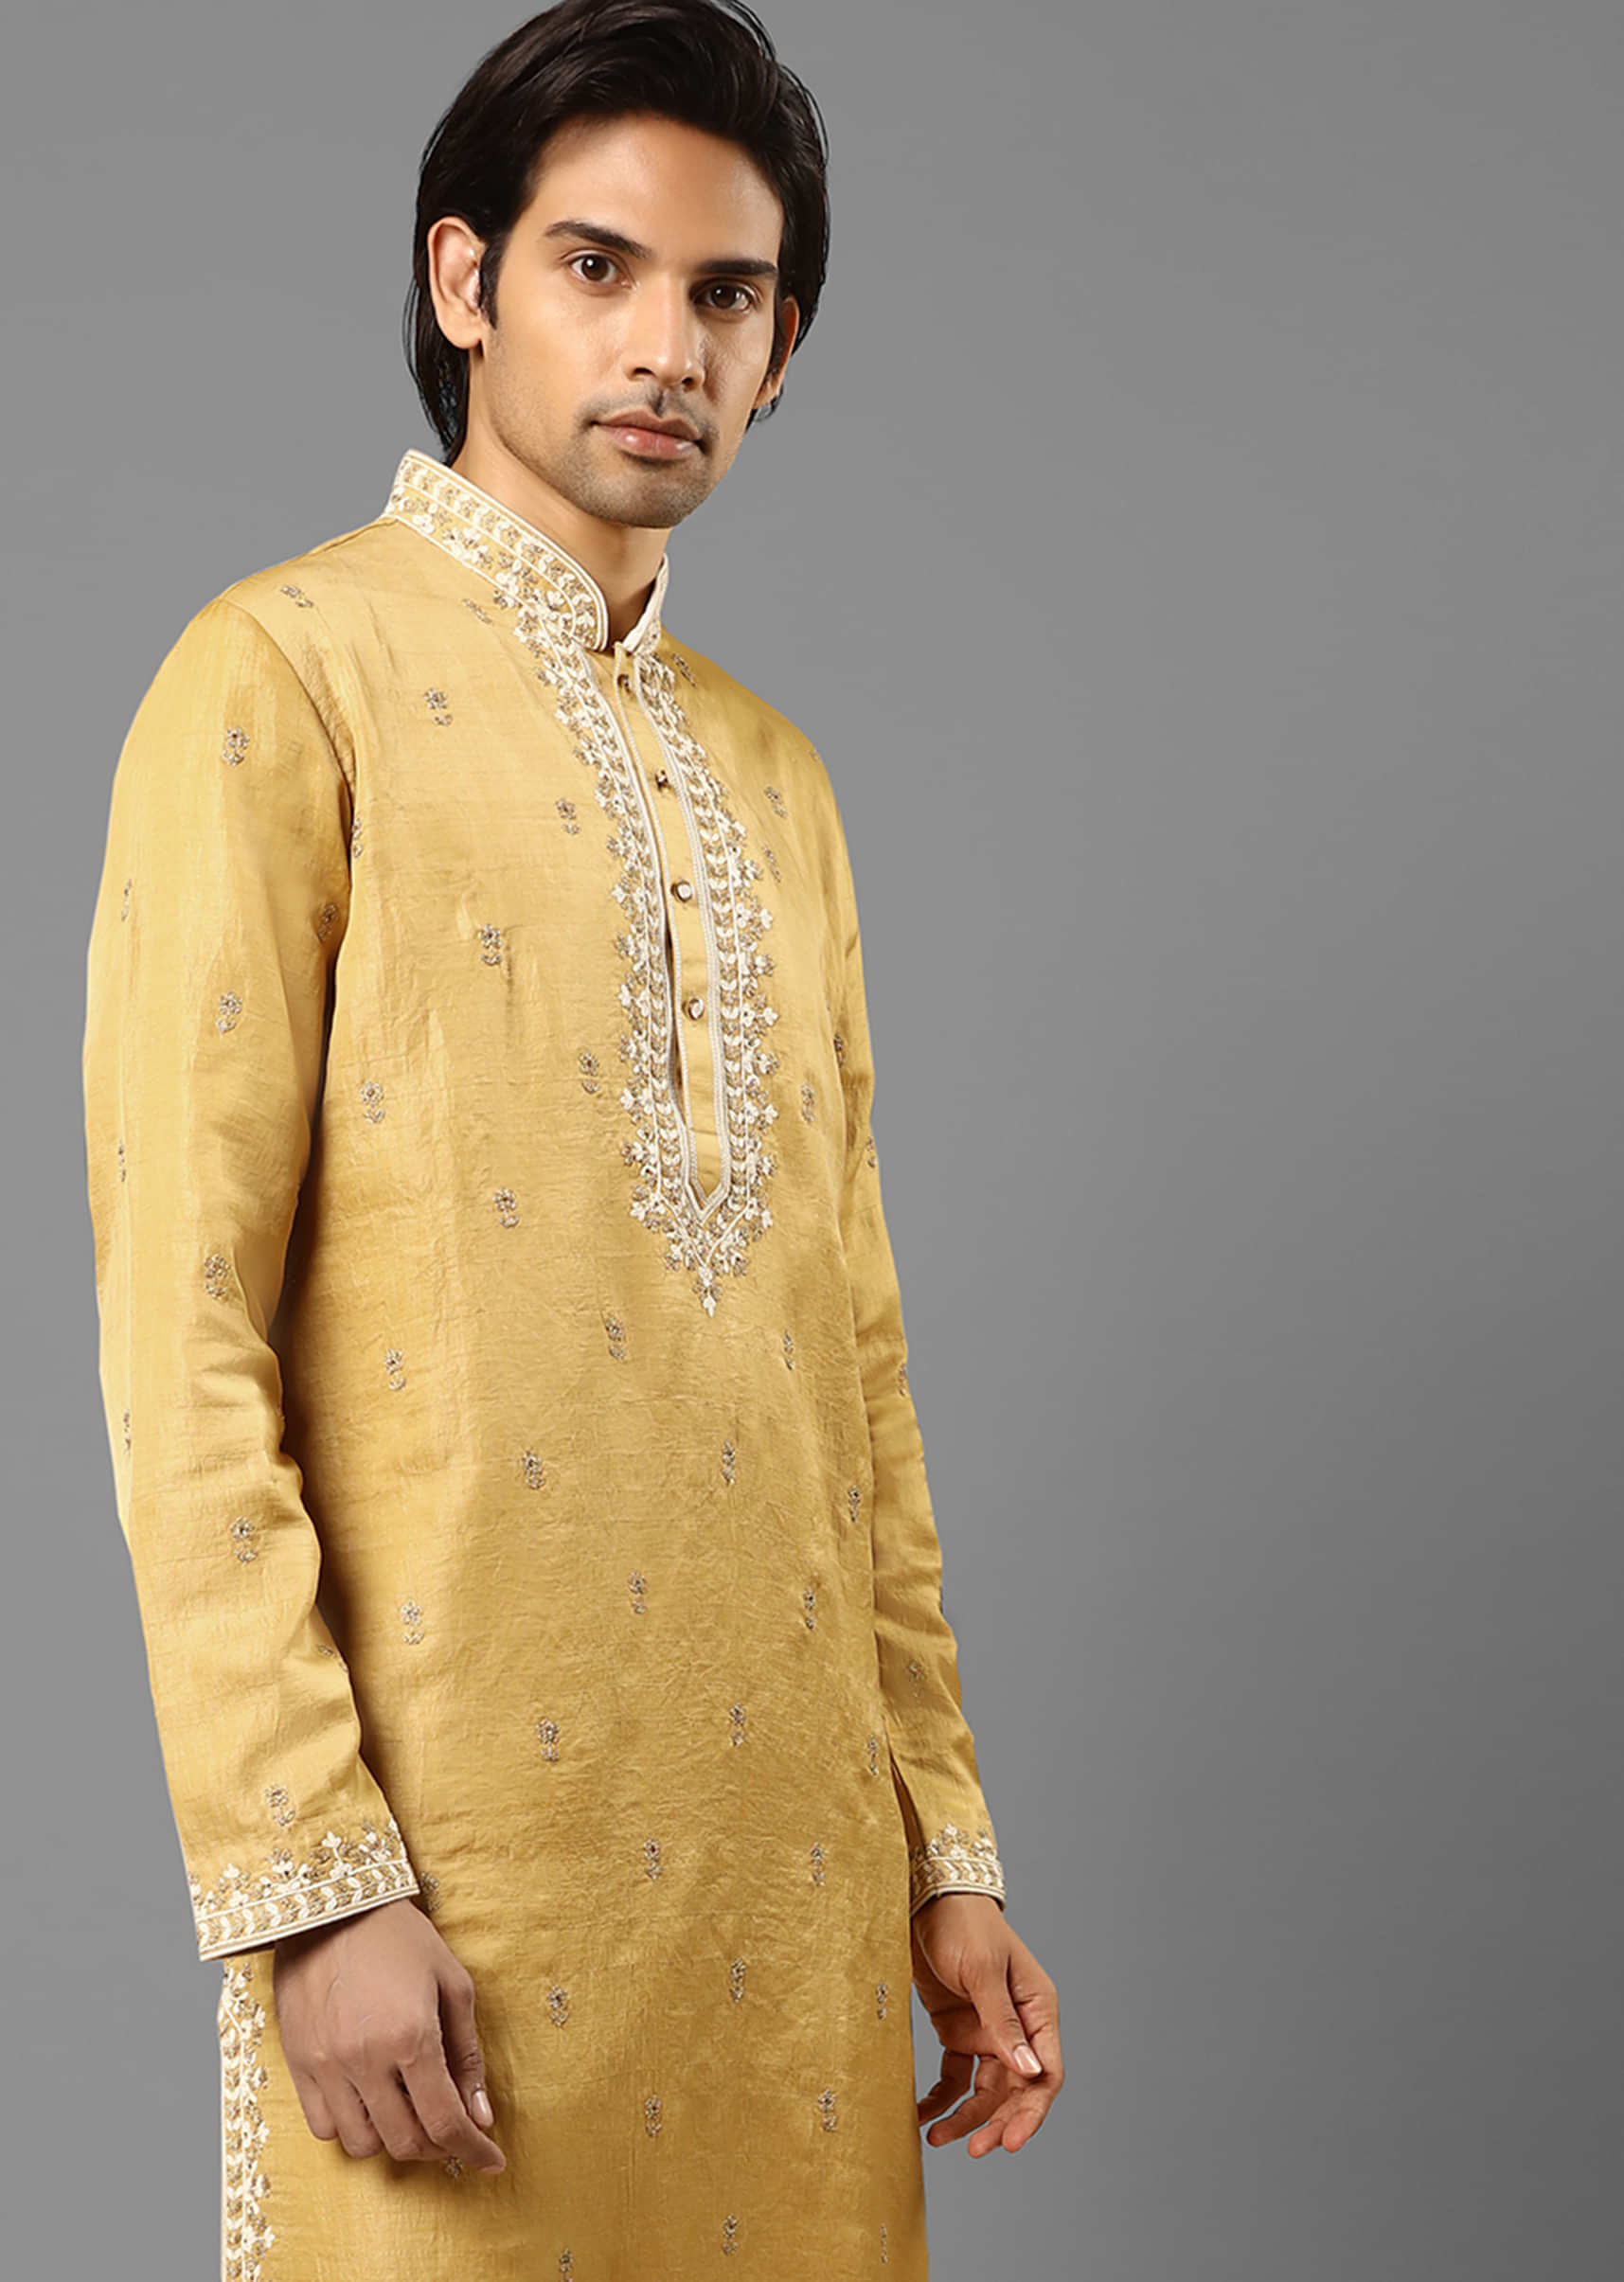 Mustard Kurta In Cotton Silk With Zari Embroidered Floral Buttis And Thread Work On The Yoke